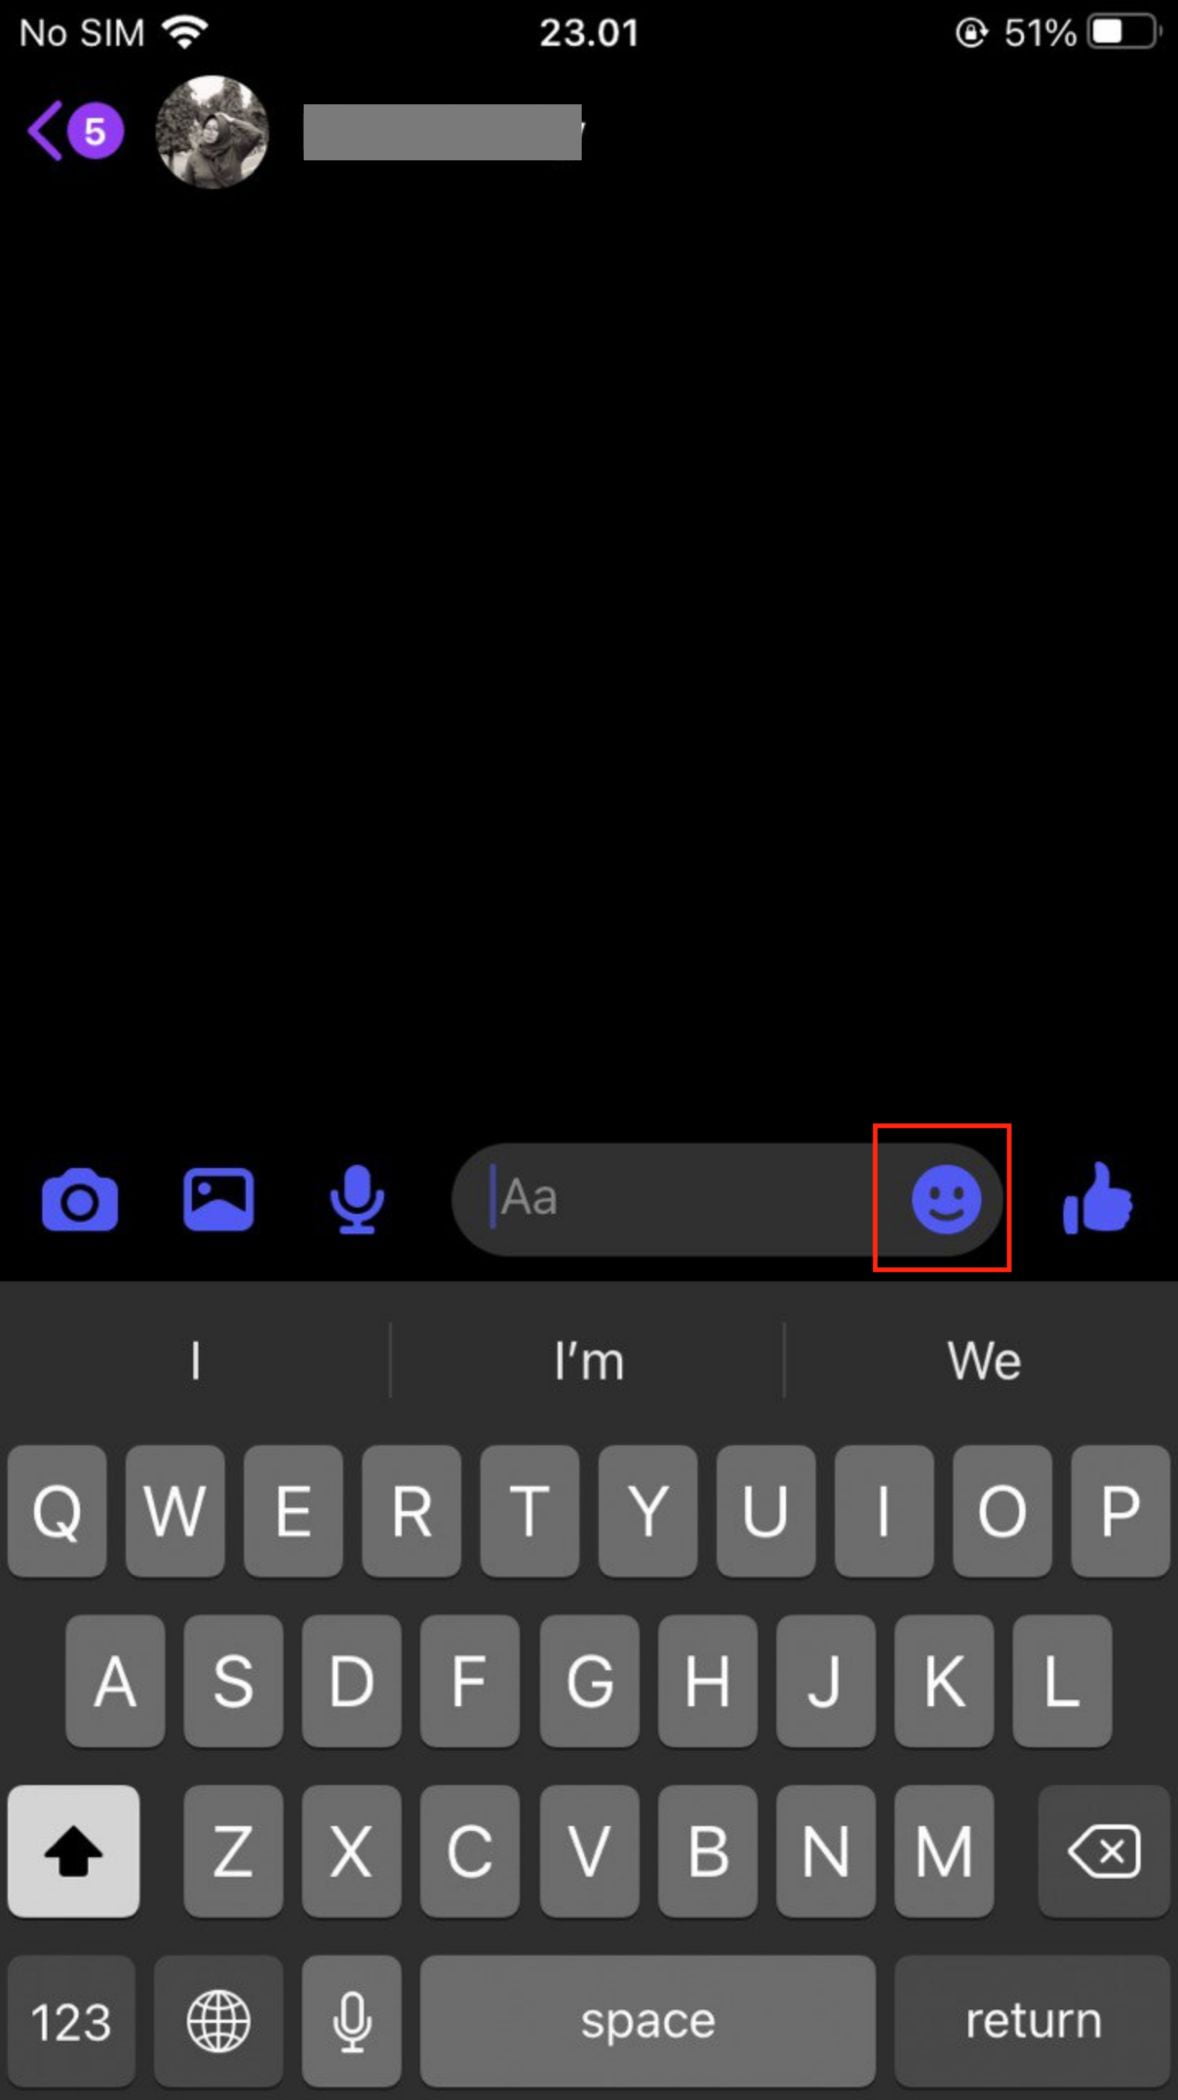 How to Send Soundmojis on Facebook Messenger using iPhone